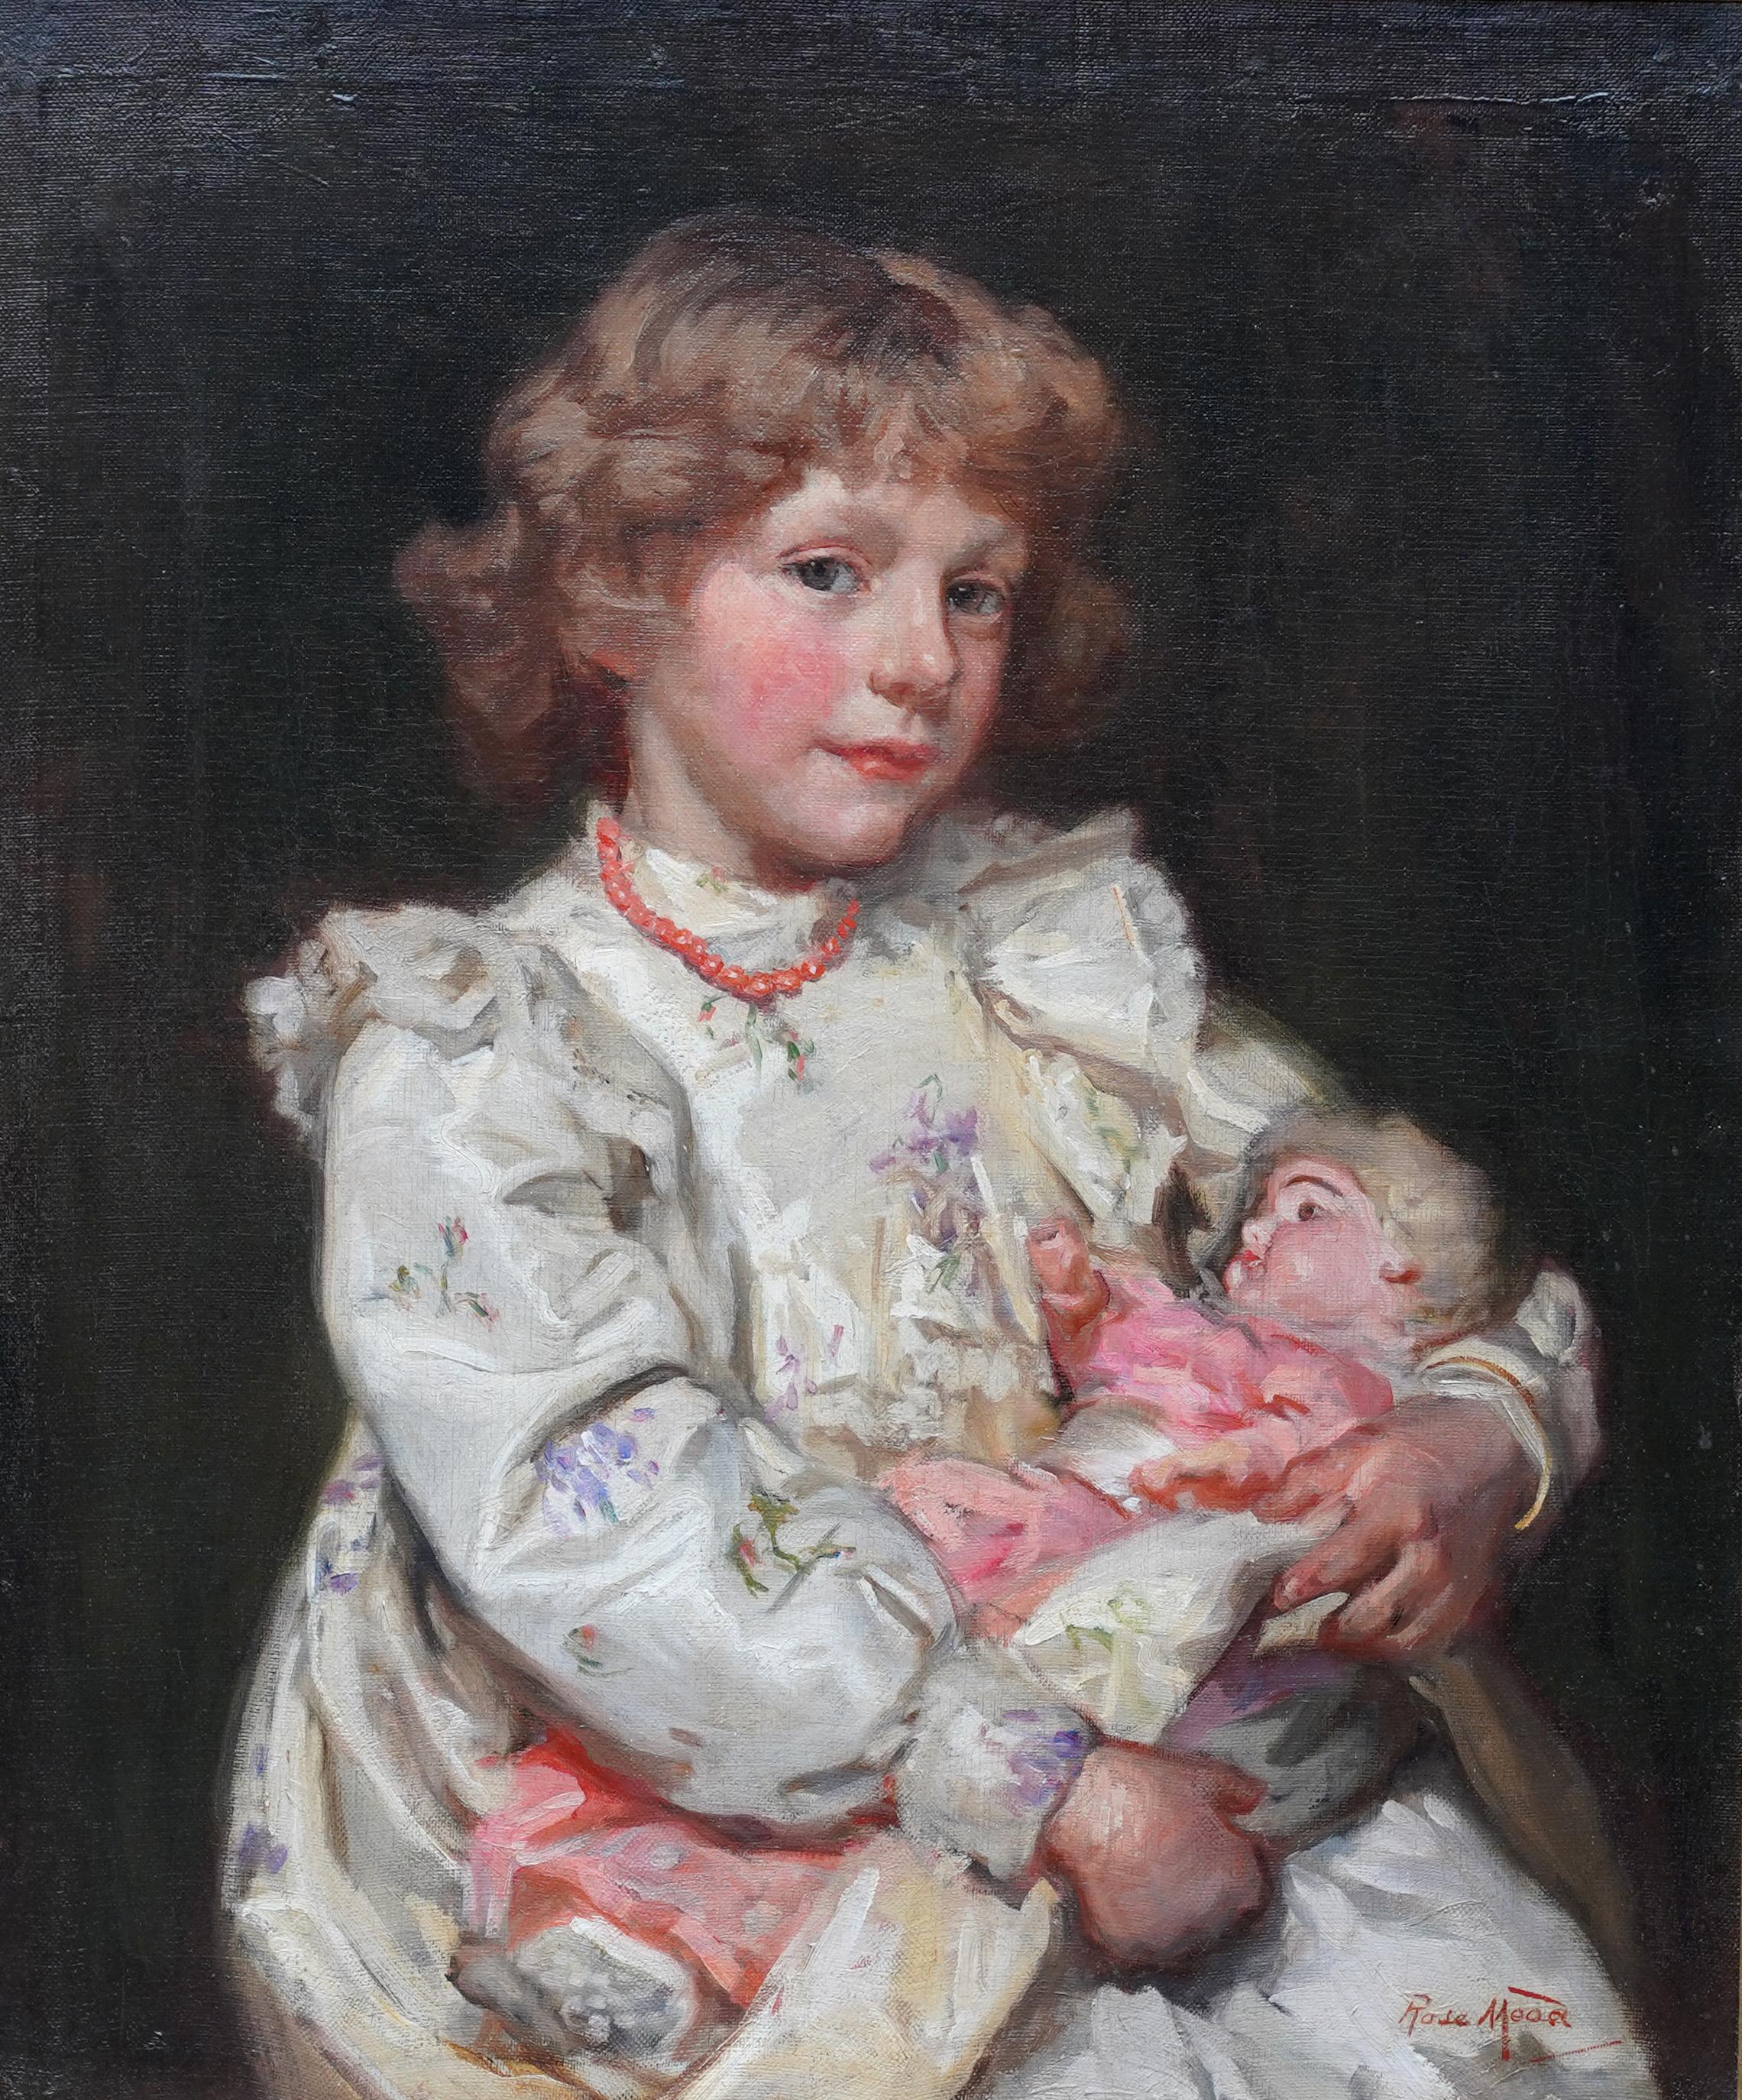 Portrait of a Girl with Doll - British Edwardian art portrait oil painting - Painting by Rose Mead